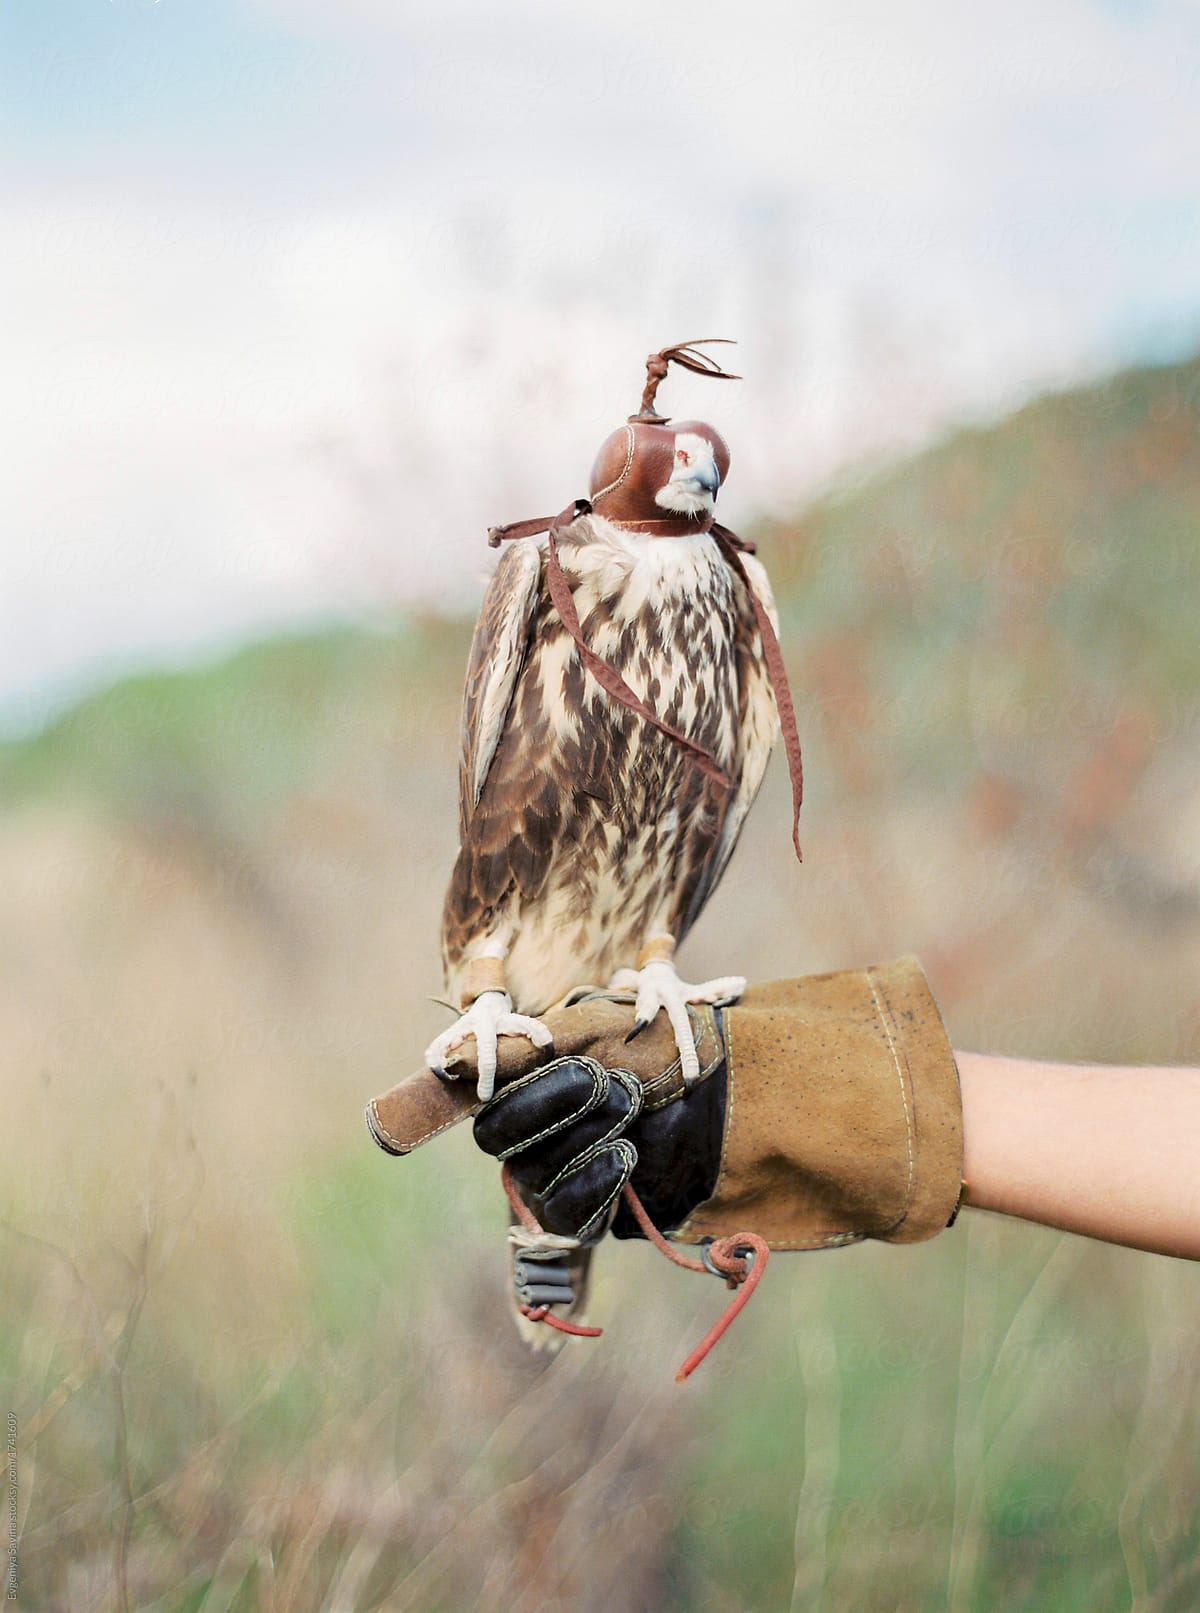 A hunting falcon witting on a human's hand